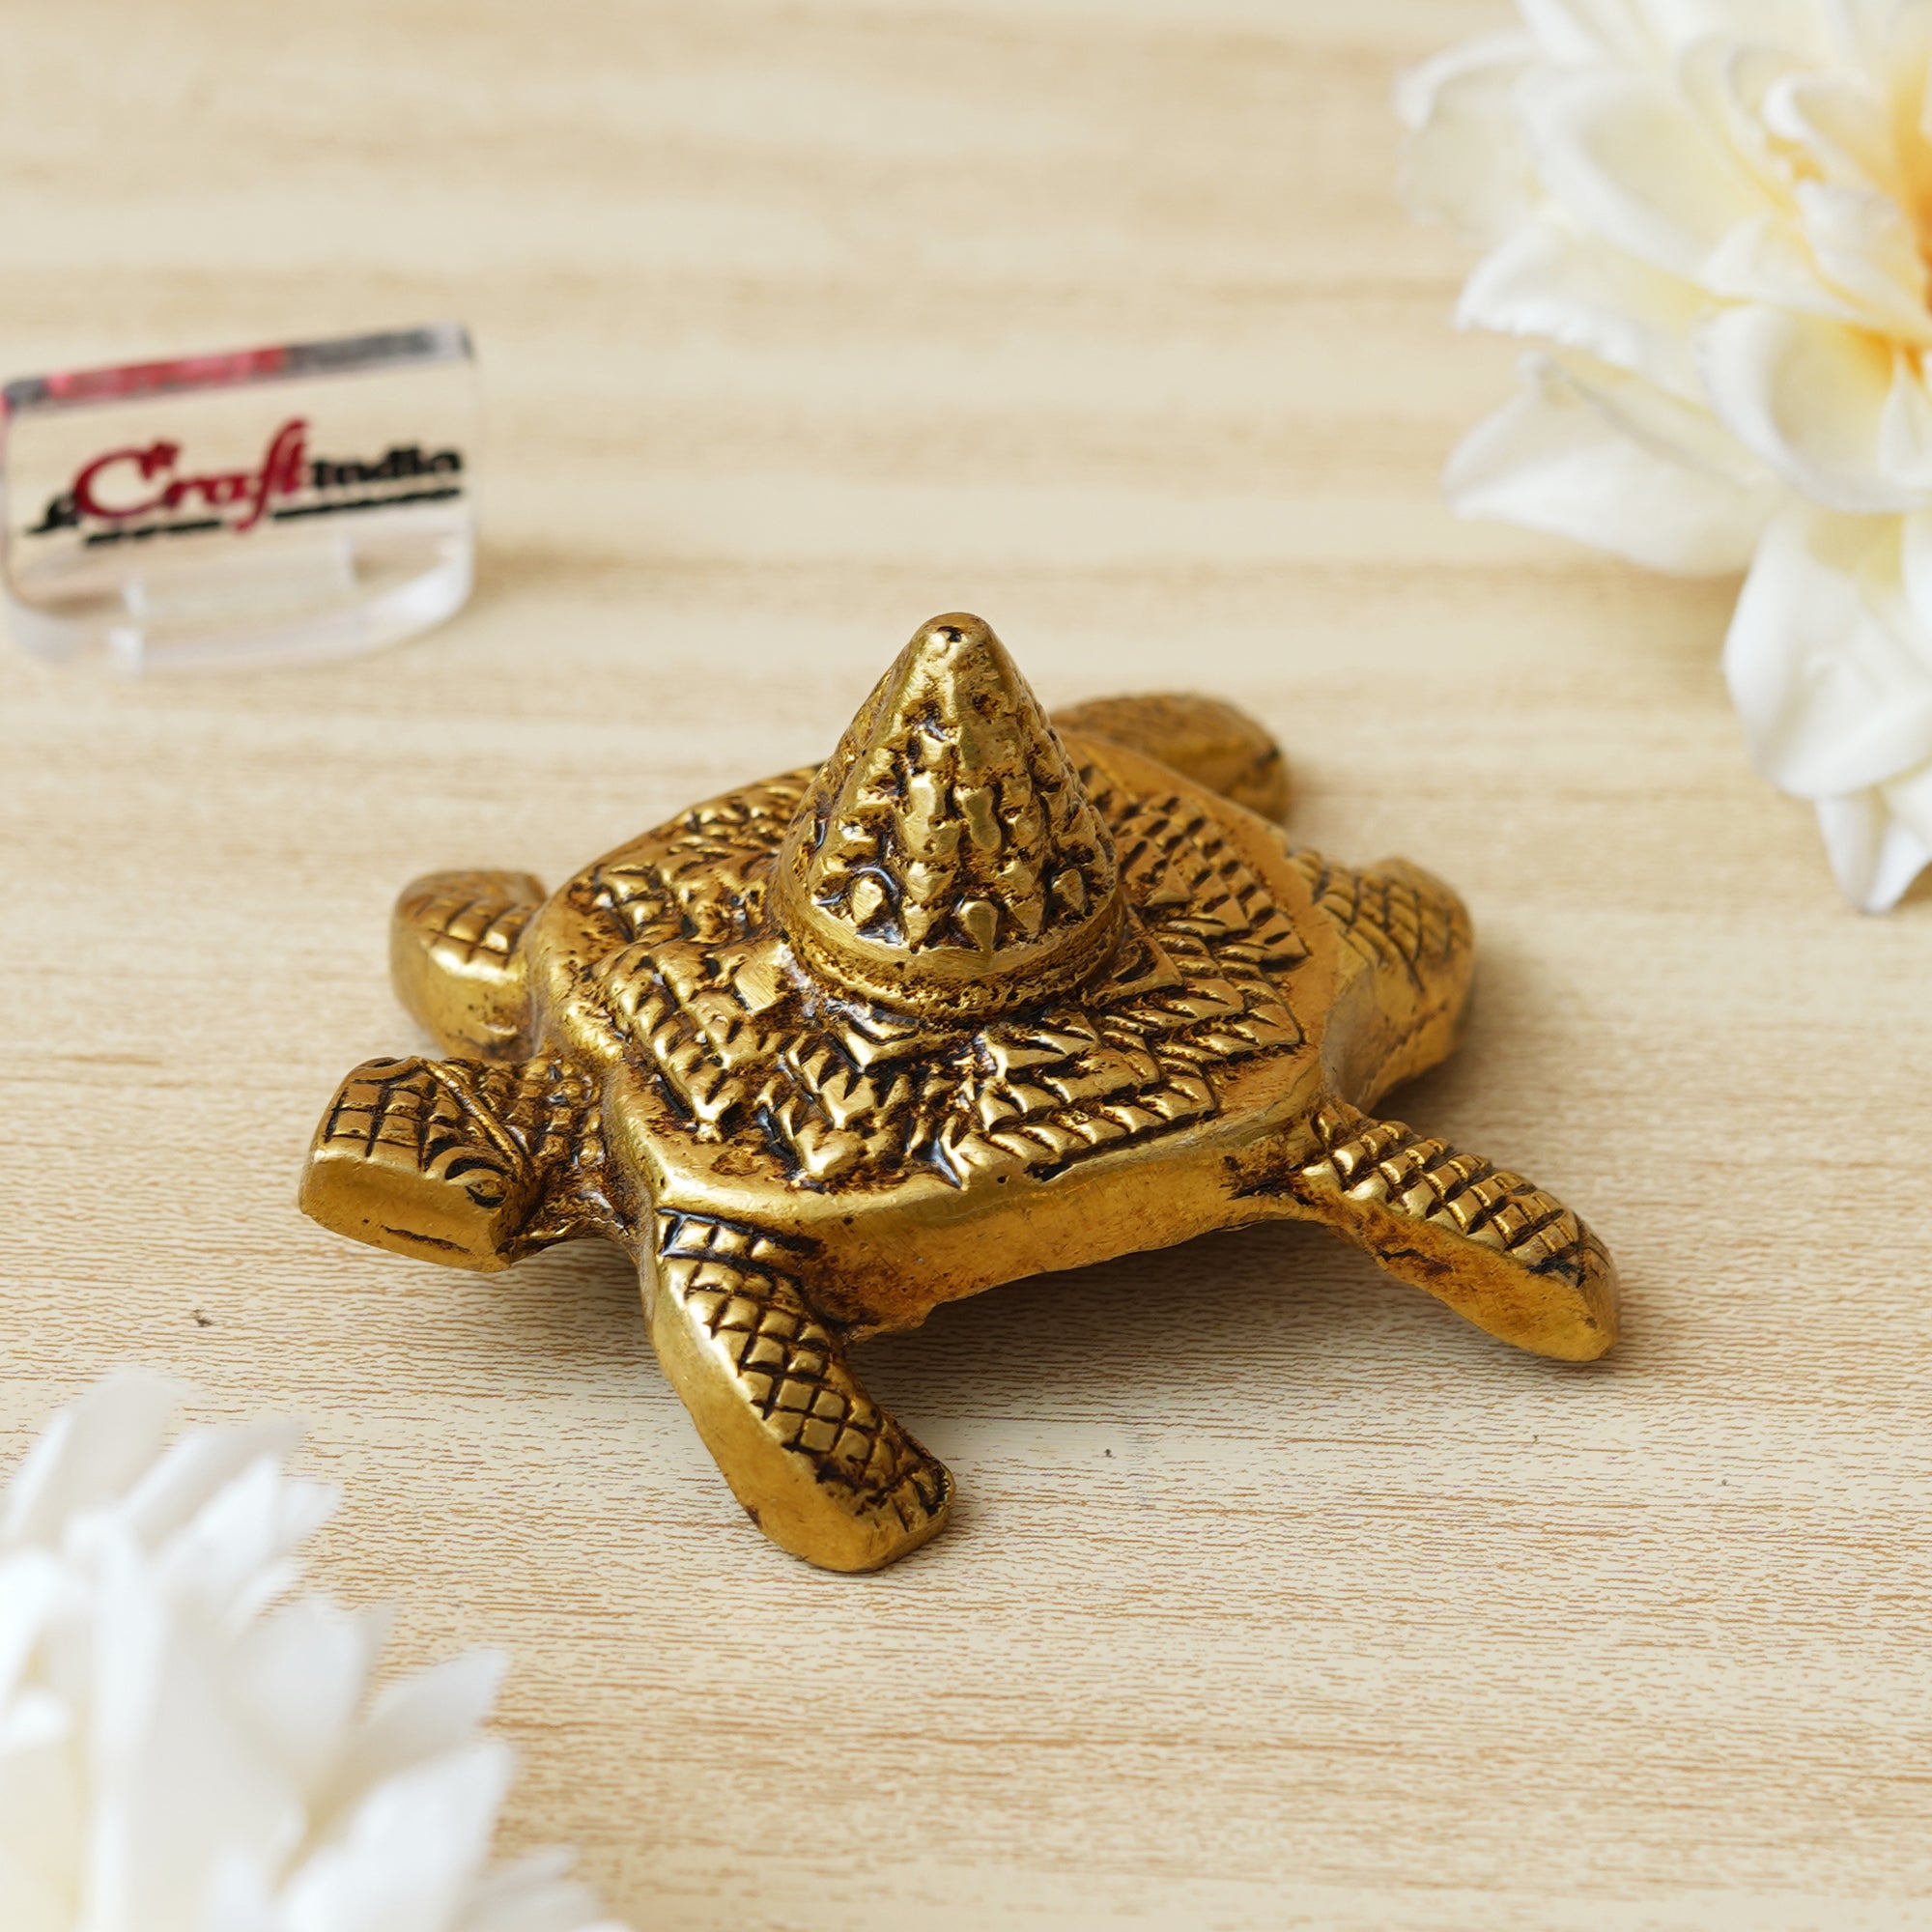 Golden Brass Meru Shree Yantra on Tortoise Statue Showpiece for Home, Office, and Temple - Bring Good Luck - Gift for Festive Occasions